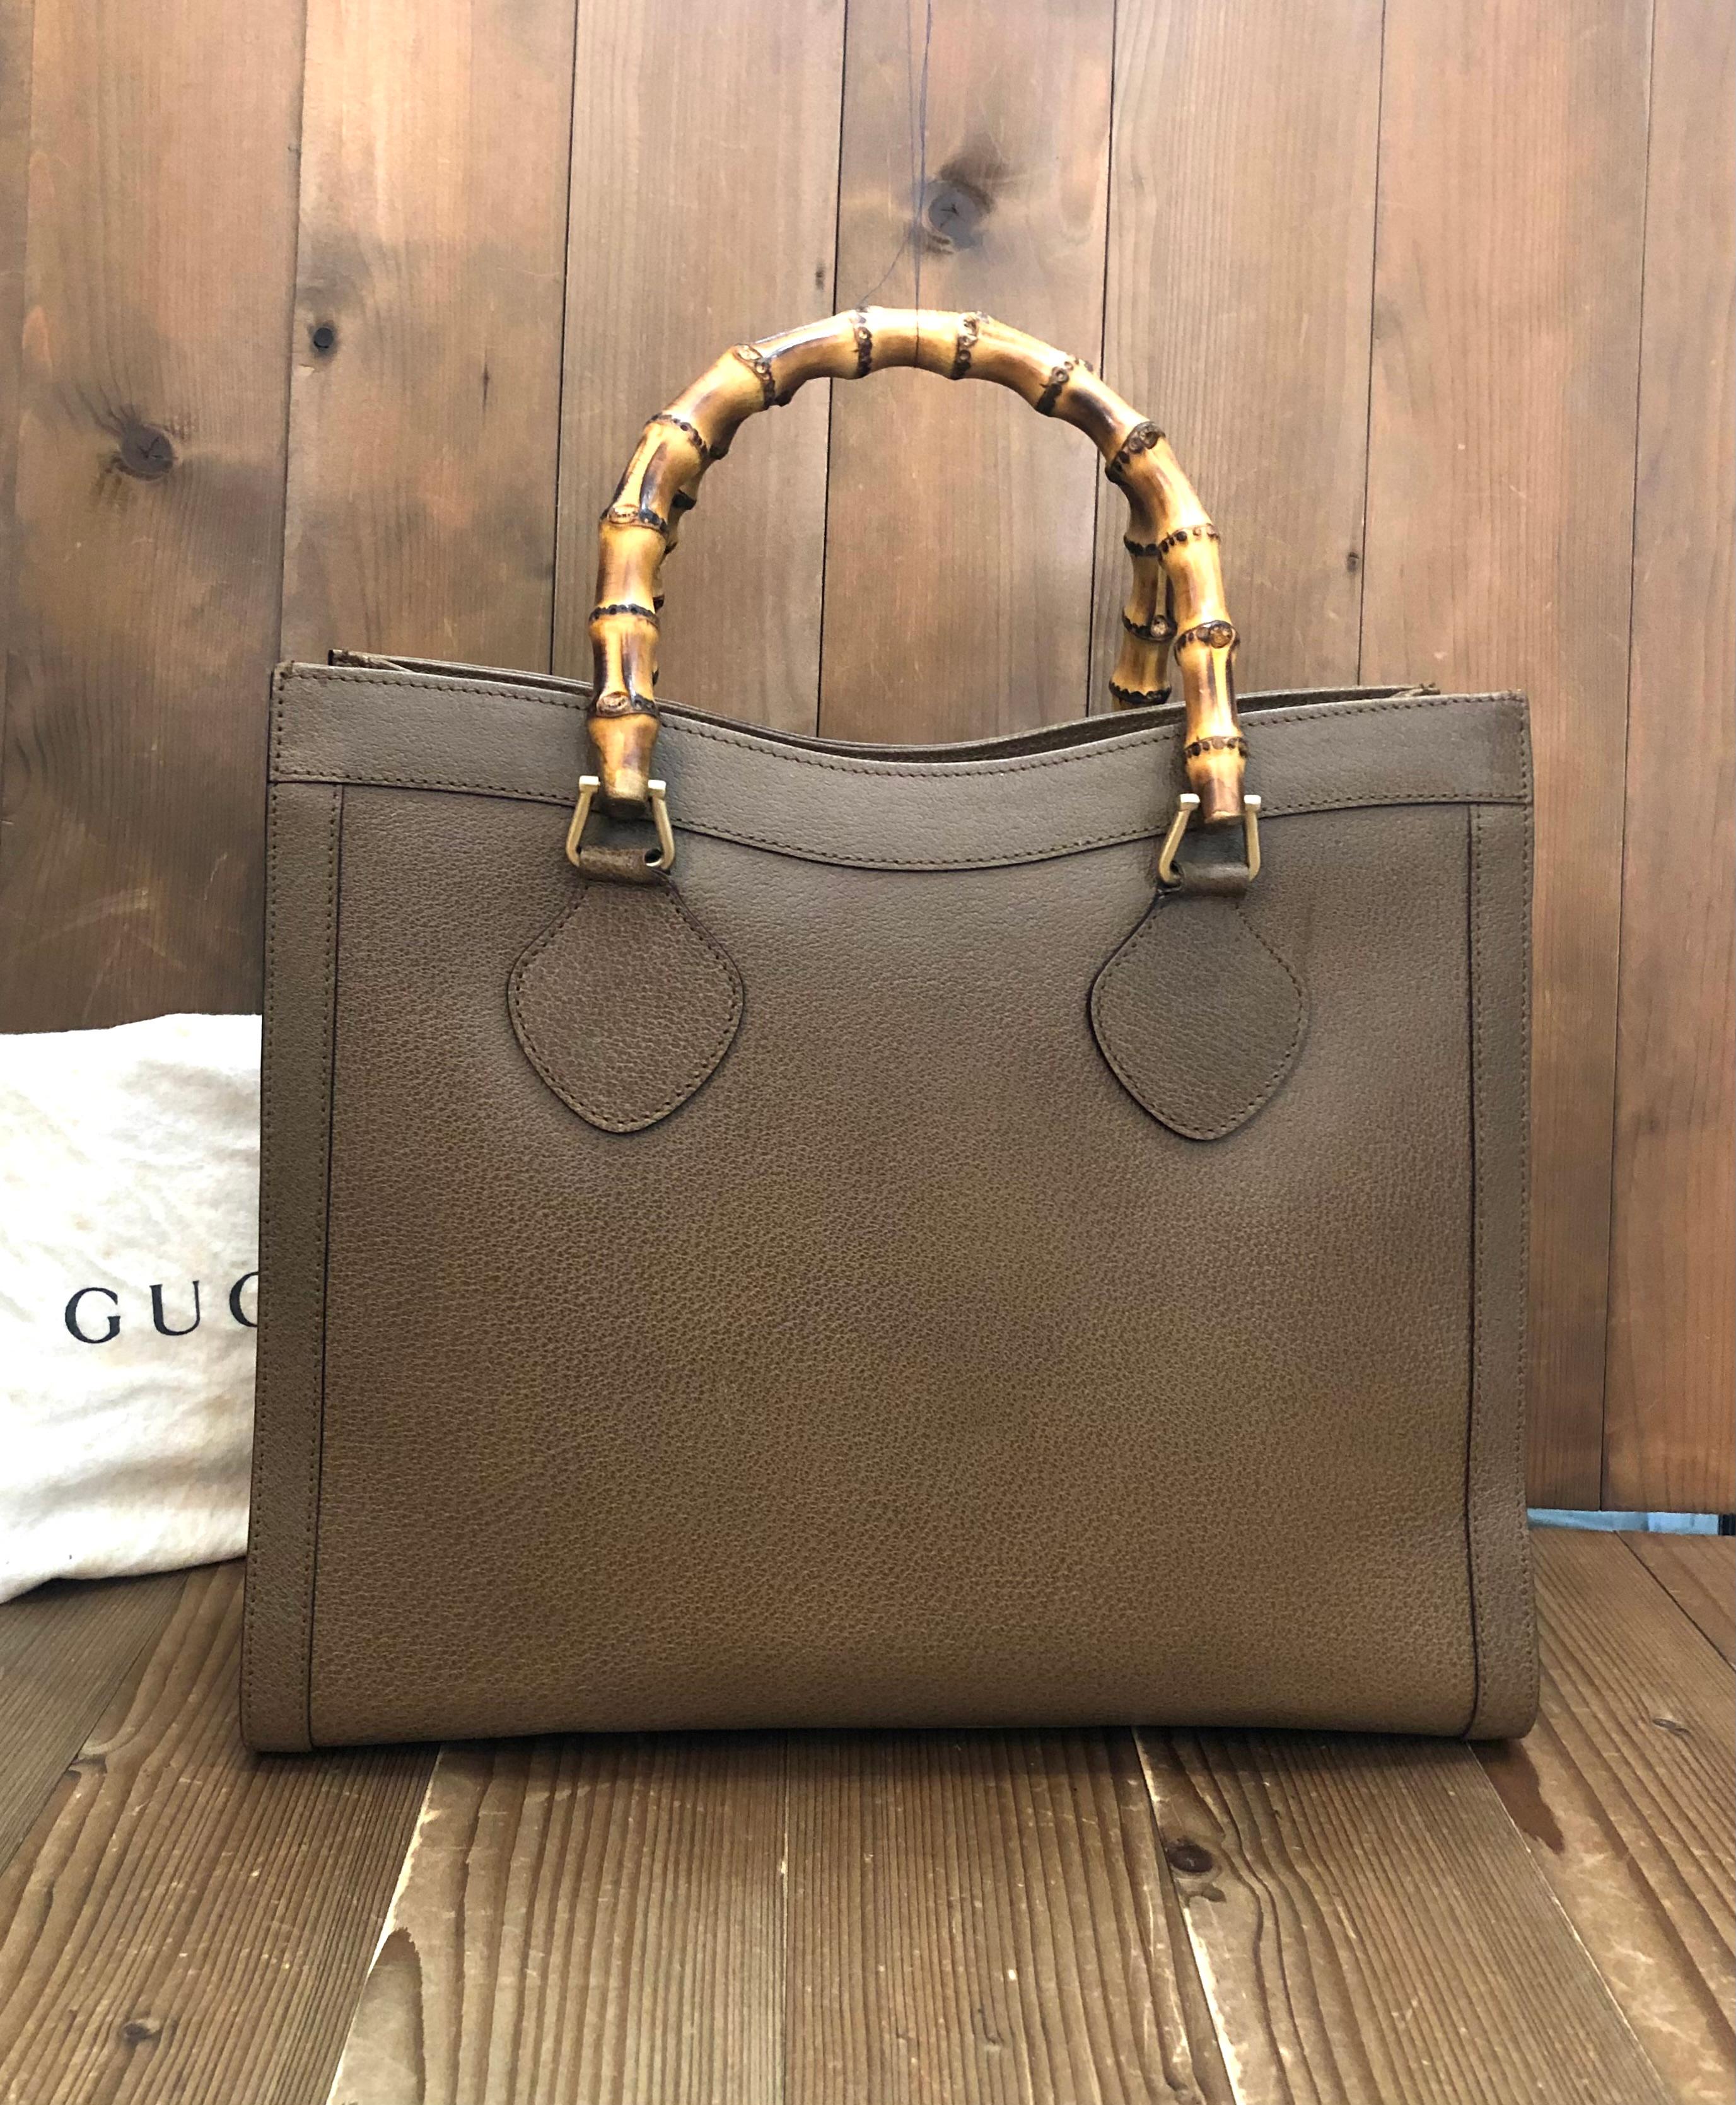 This vintage GUCCI Diana bamboo tote is crafted of pigskin’s leather in brown/green hue and brushed gold toned hardware. Top magnetic snap closure opens to Gucci’s iconic diamanté jacquard interior featuring two main compartments/one zippered